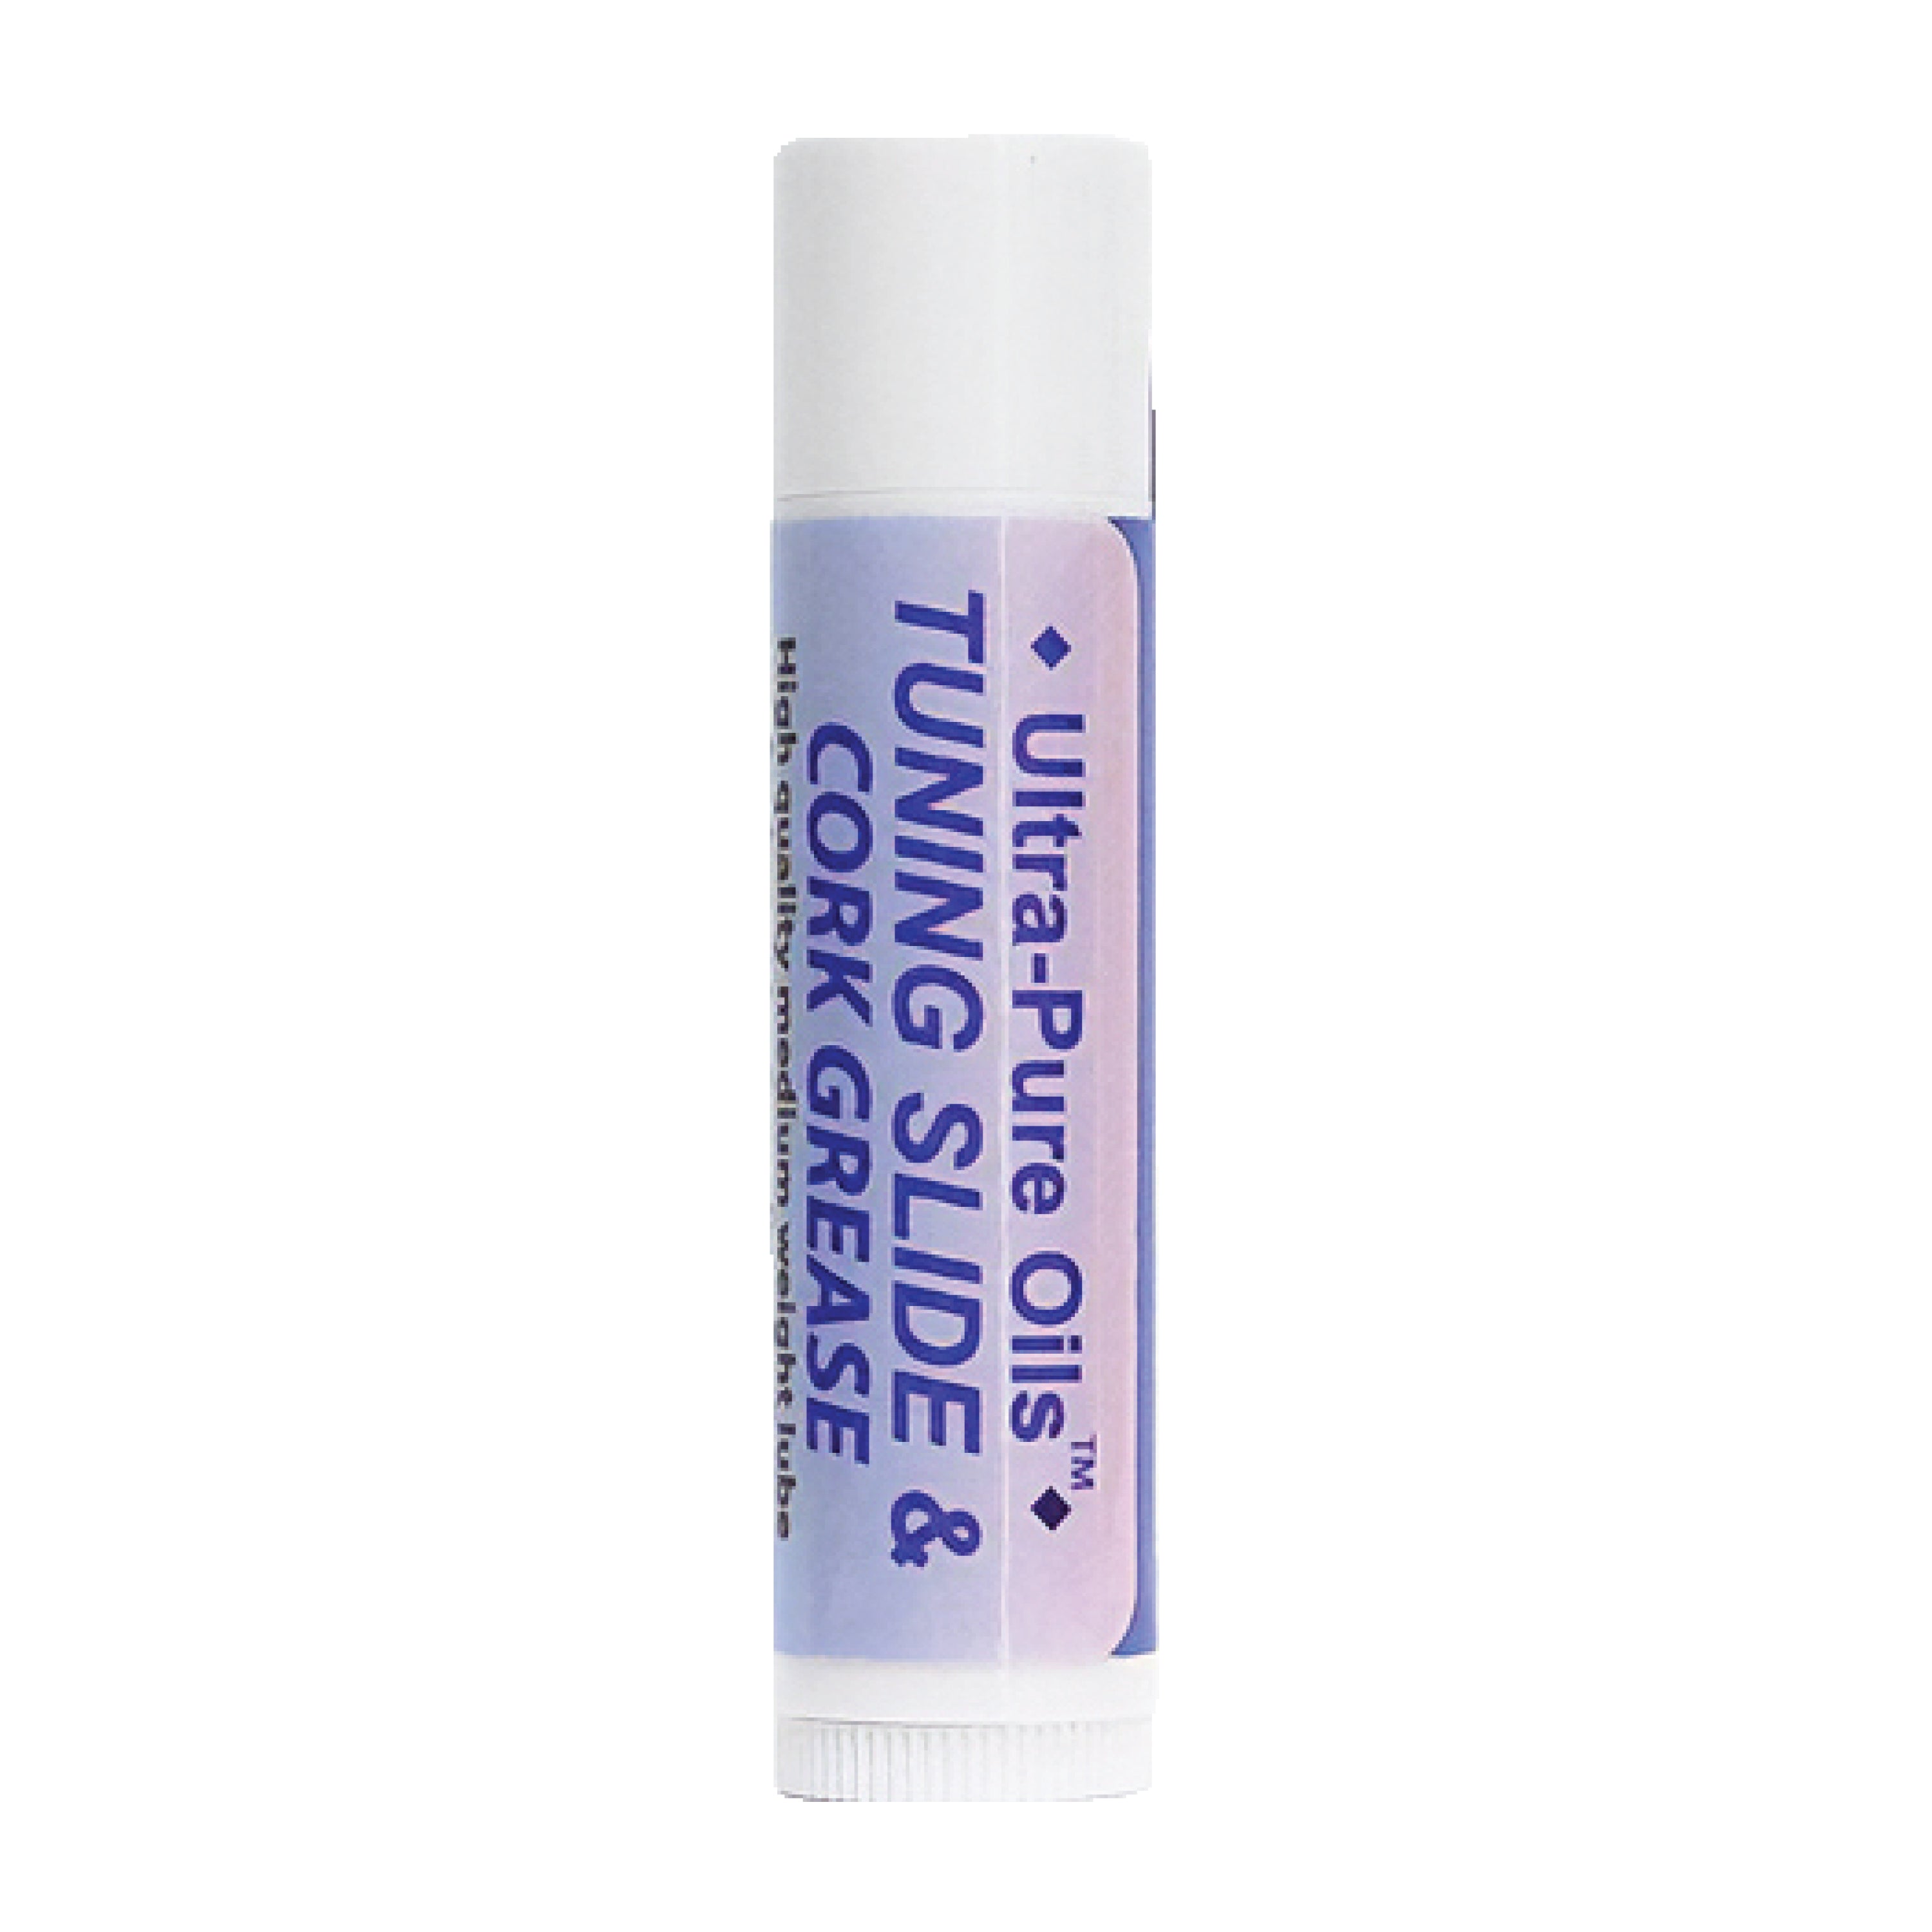 Ultra Pure Tuning Slide and Cork Grease, 4.25g